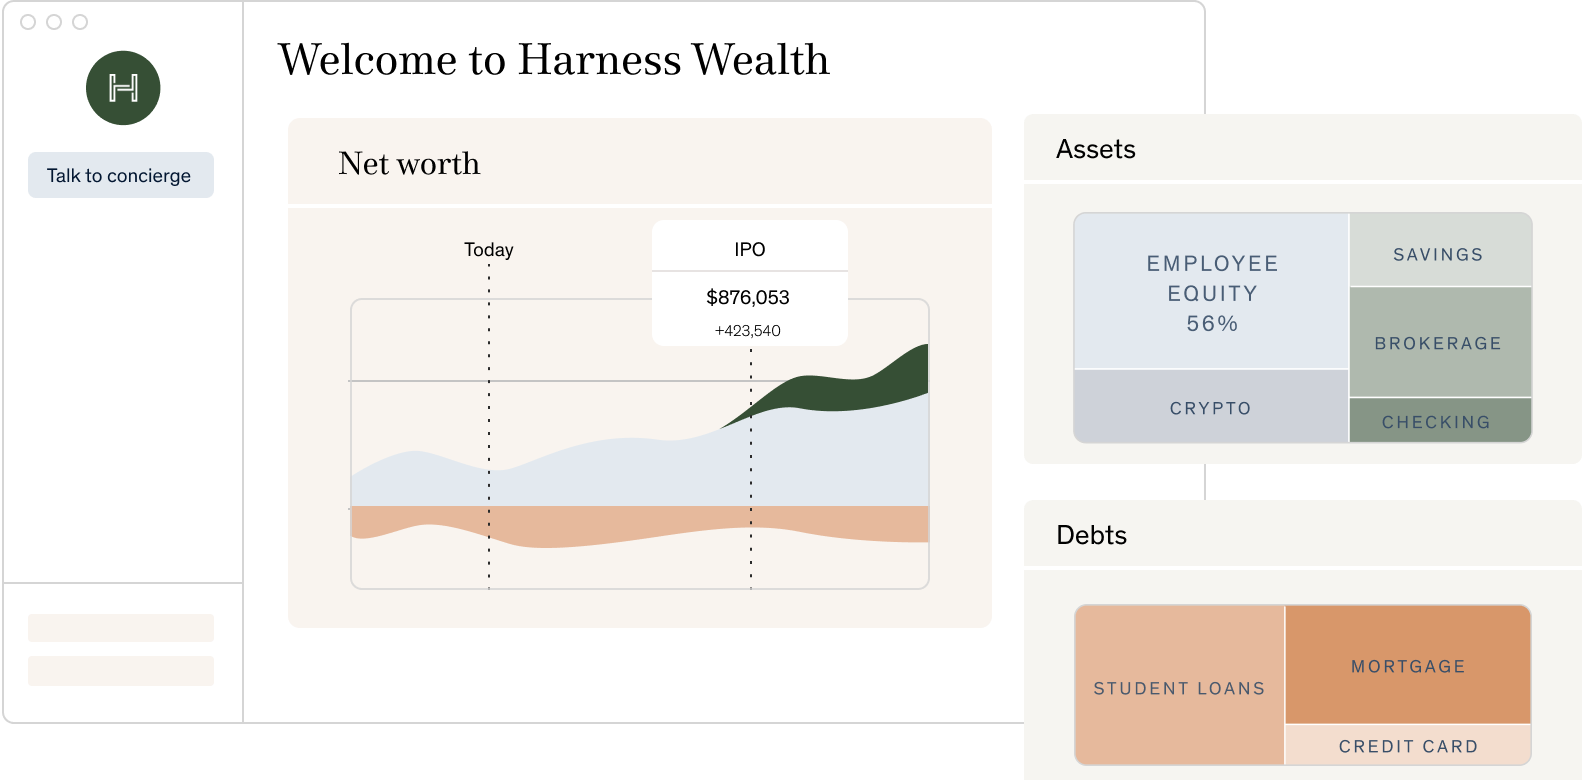 balance sheet tracking net worth, asset composition, and debt composition